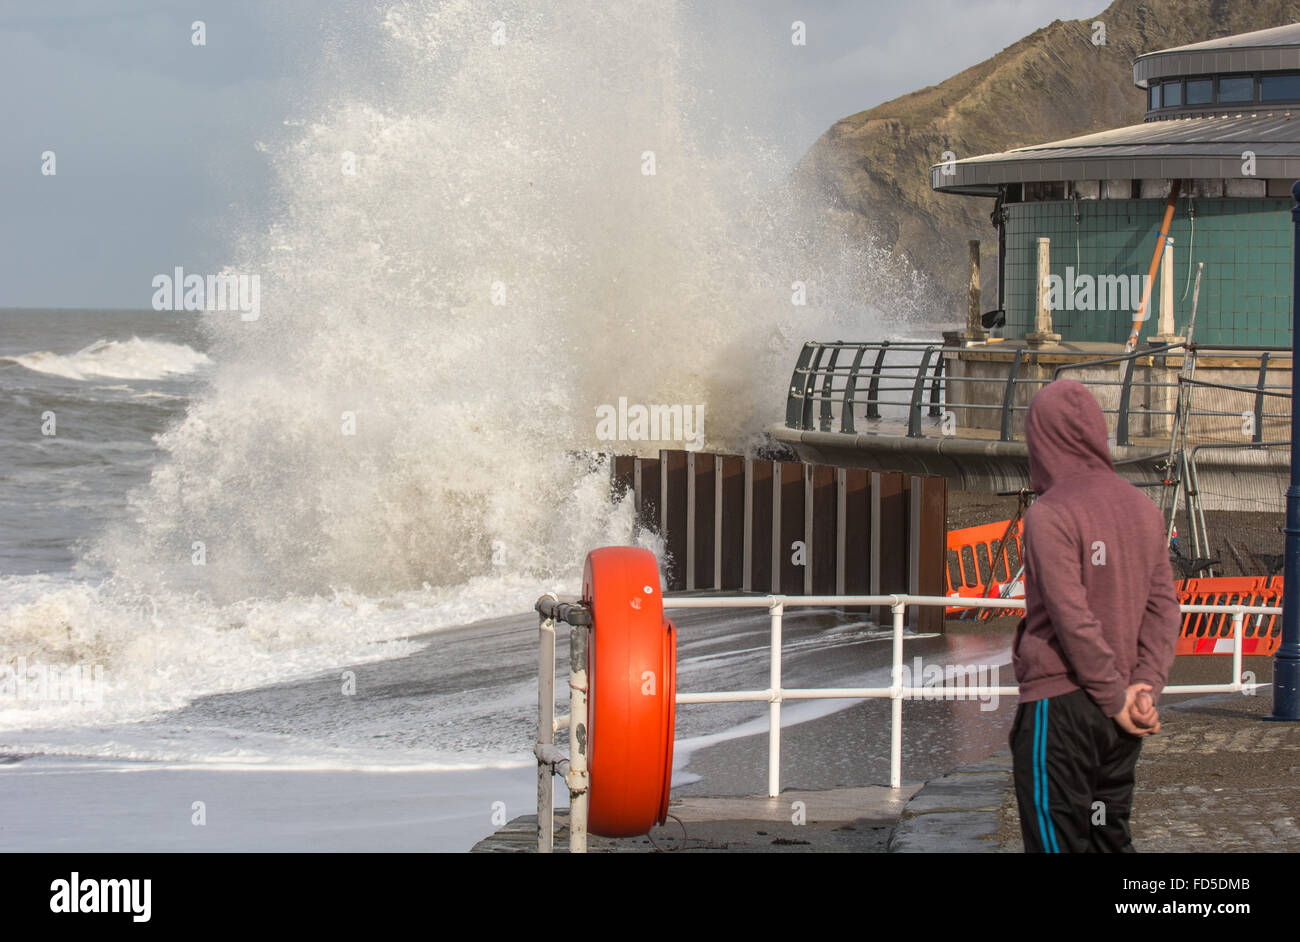 Aberystwyth, Ceredigion, West Wales, UK. 28th January, 2016. UK Weather: whilst the gale force winds from Storm Jonas have died down the sea is still pounding the coastline and with the sun breaking people have come out to watch and photograph the rough seas. Credit:  Trebuchet Photography / Alamy Live News Stock Photo